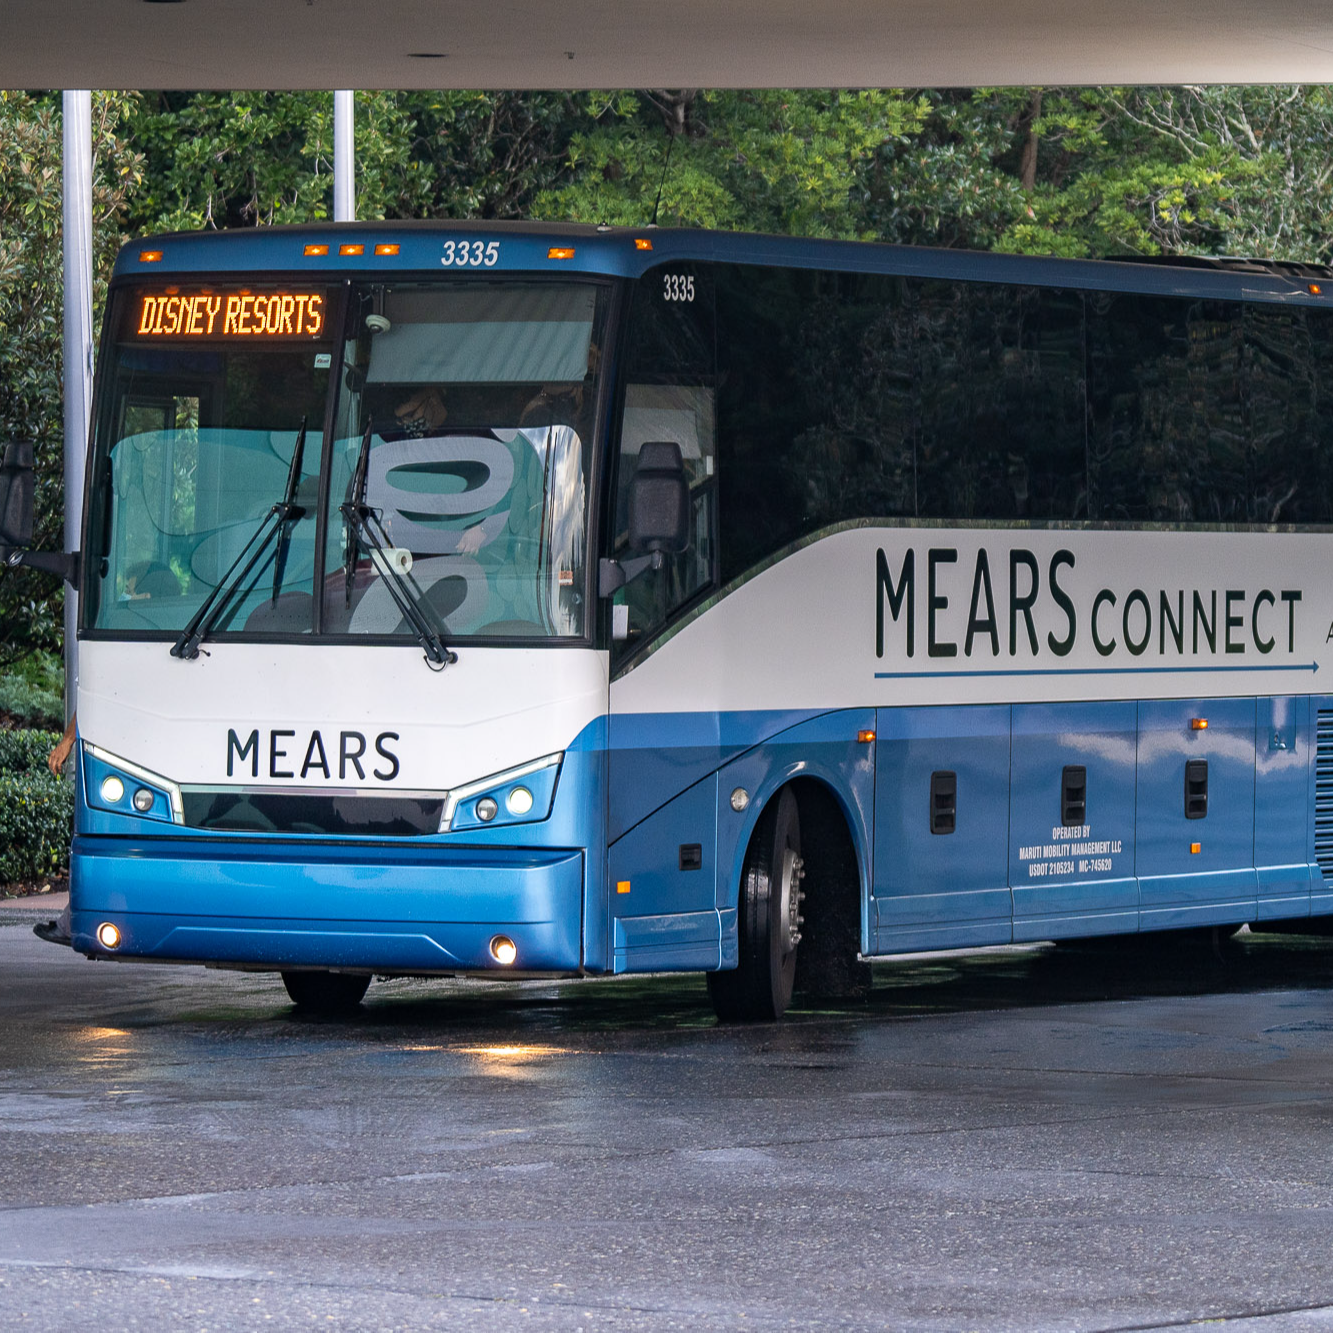 Mears Connect